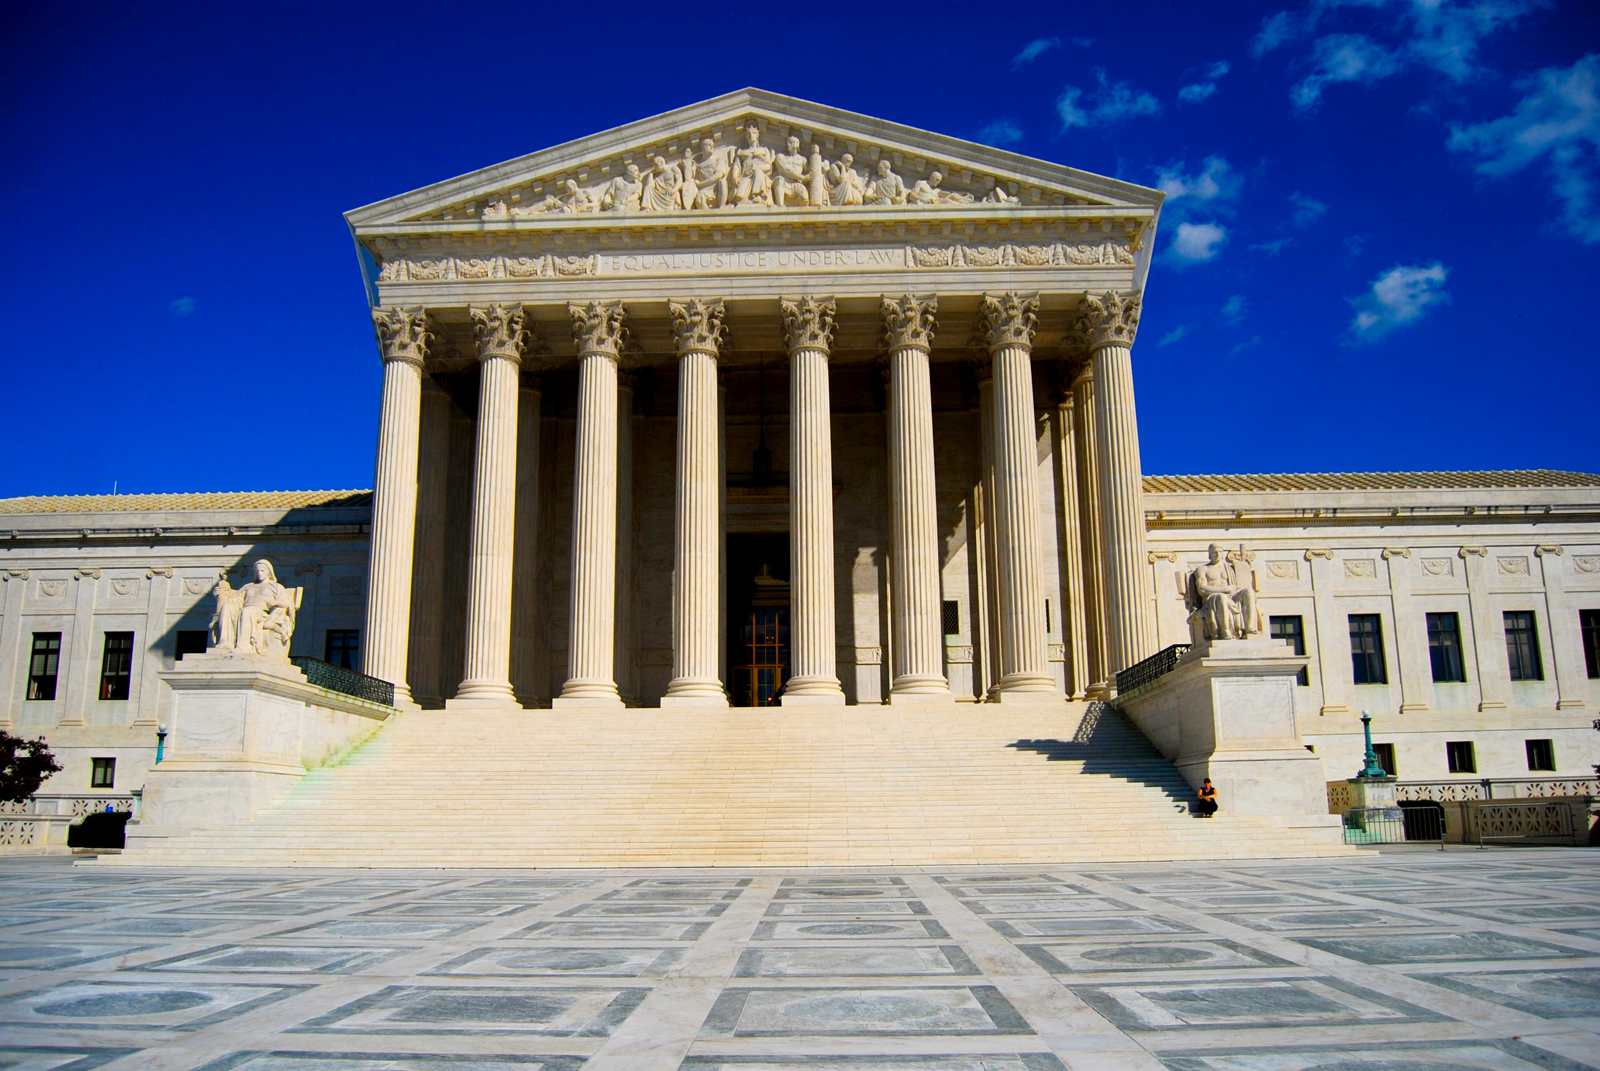 The Supreme Court of the United States (Photo Credit: David Ortez)